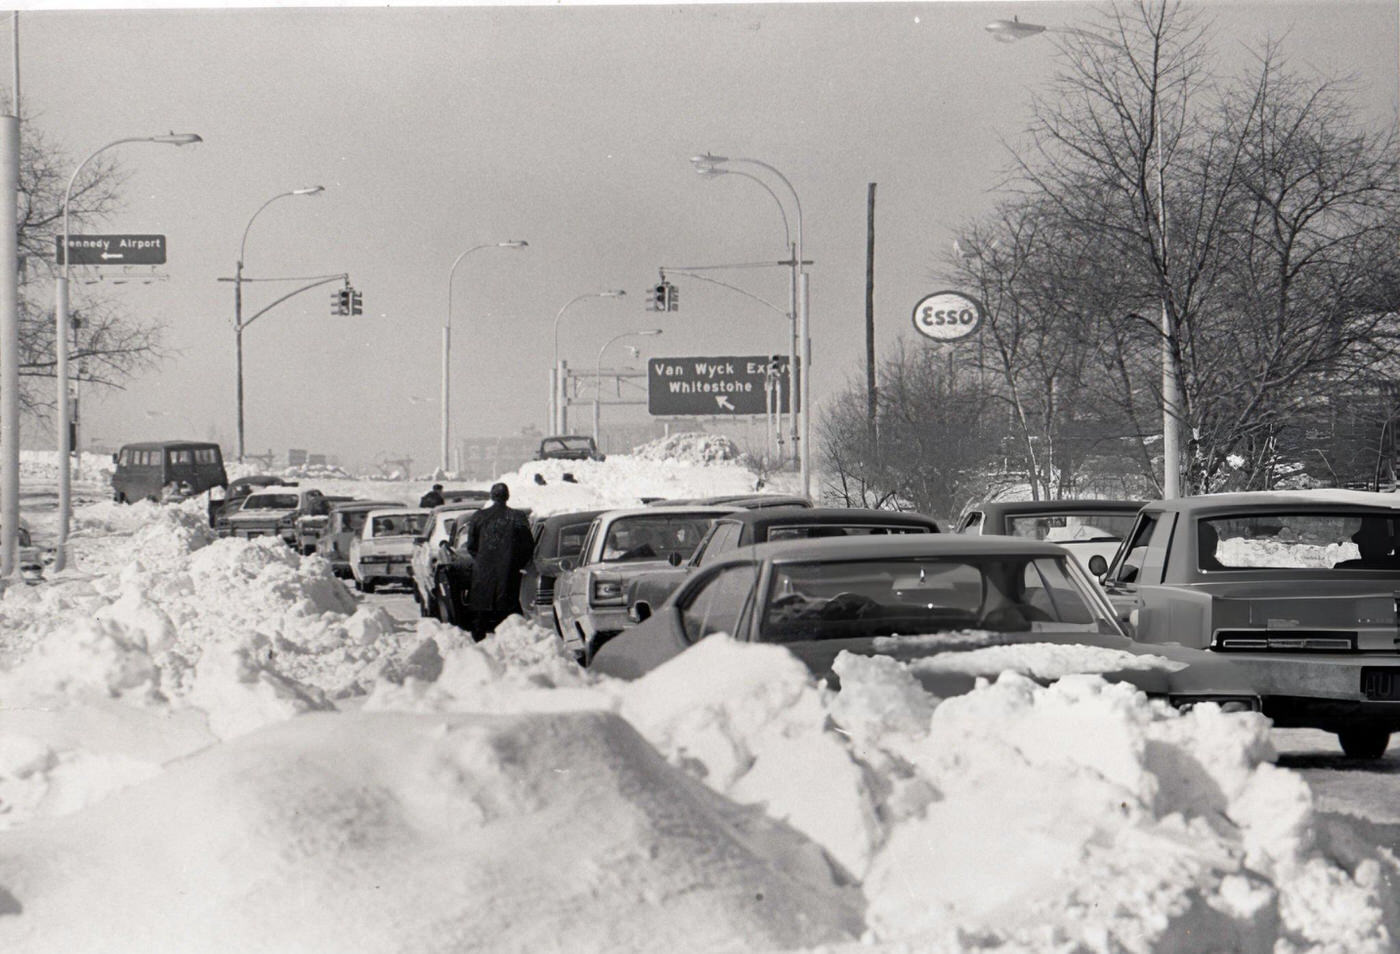 Cars Stalled Along The Route Into Kennedy Airport Due To Heavy Snow Drifts, 1969.